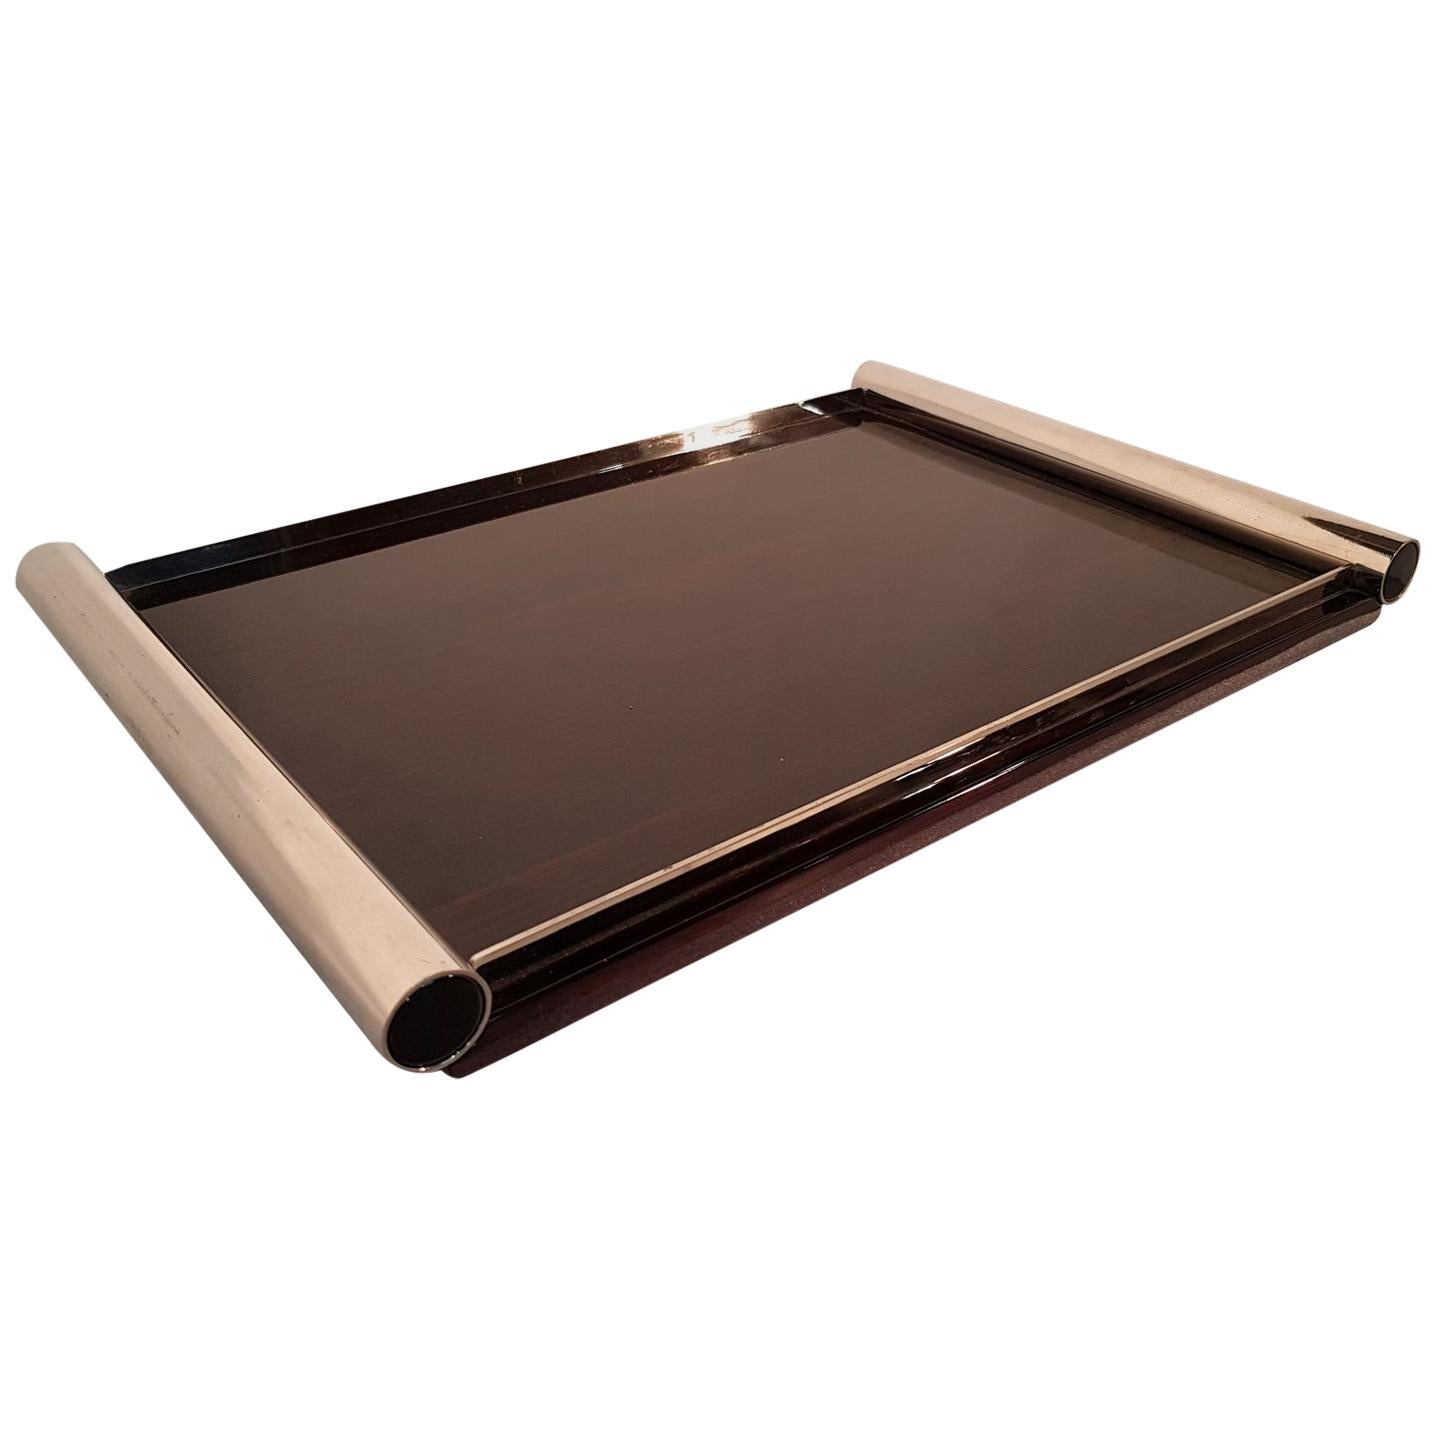 French Art Deco Lacquered Macassar Wood Tray with Nickel Handles